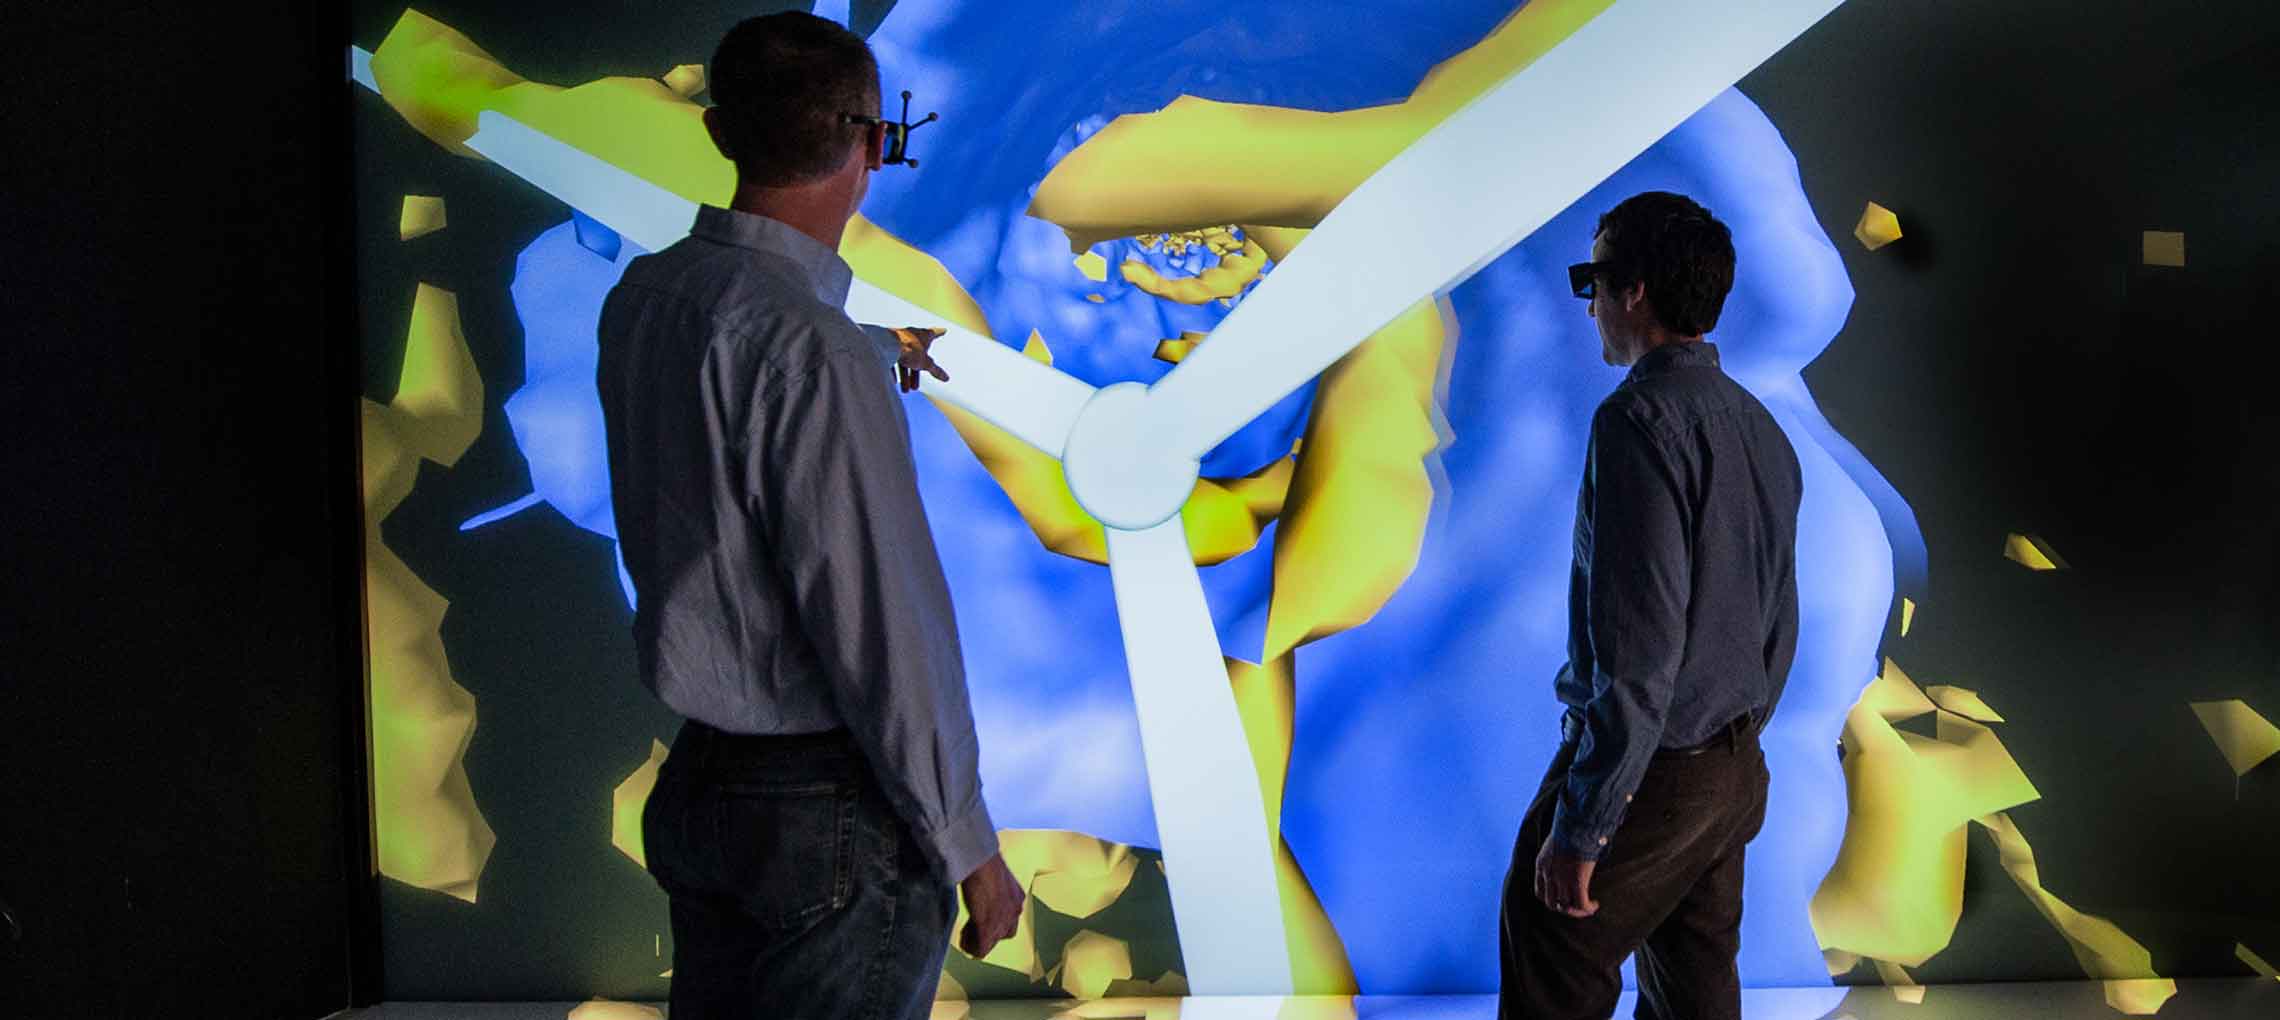 In this photo, a scientist wearing special glasses points to an image on a large visualization screen while another scientist wearing similar glasses looks on.